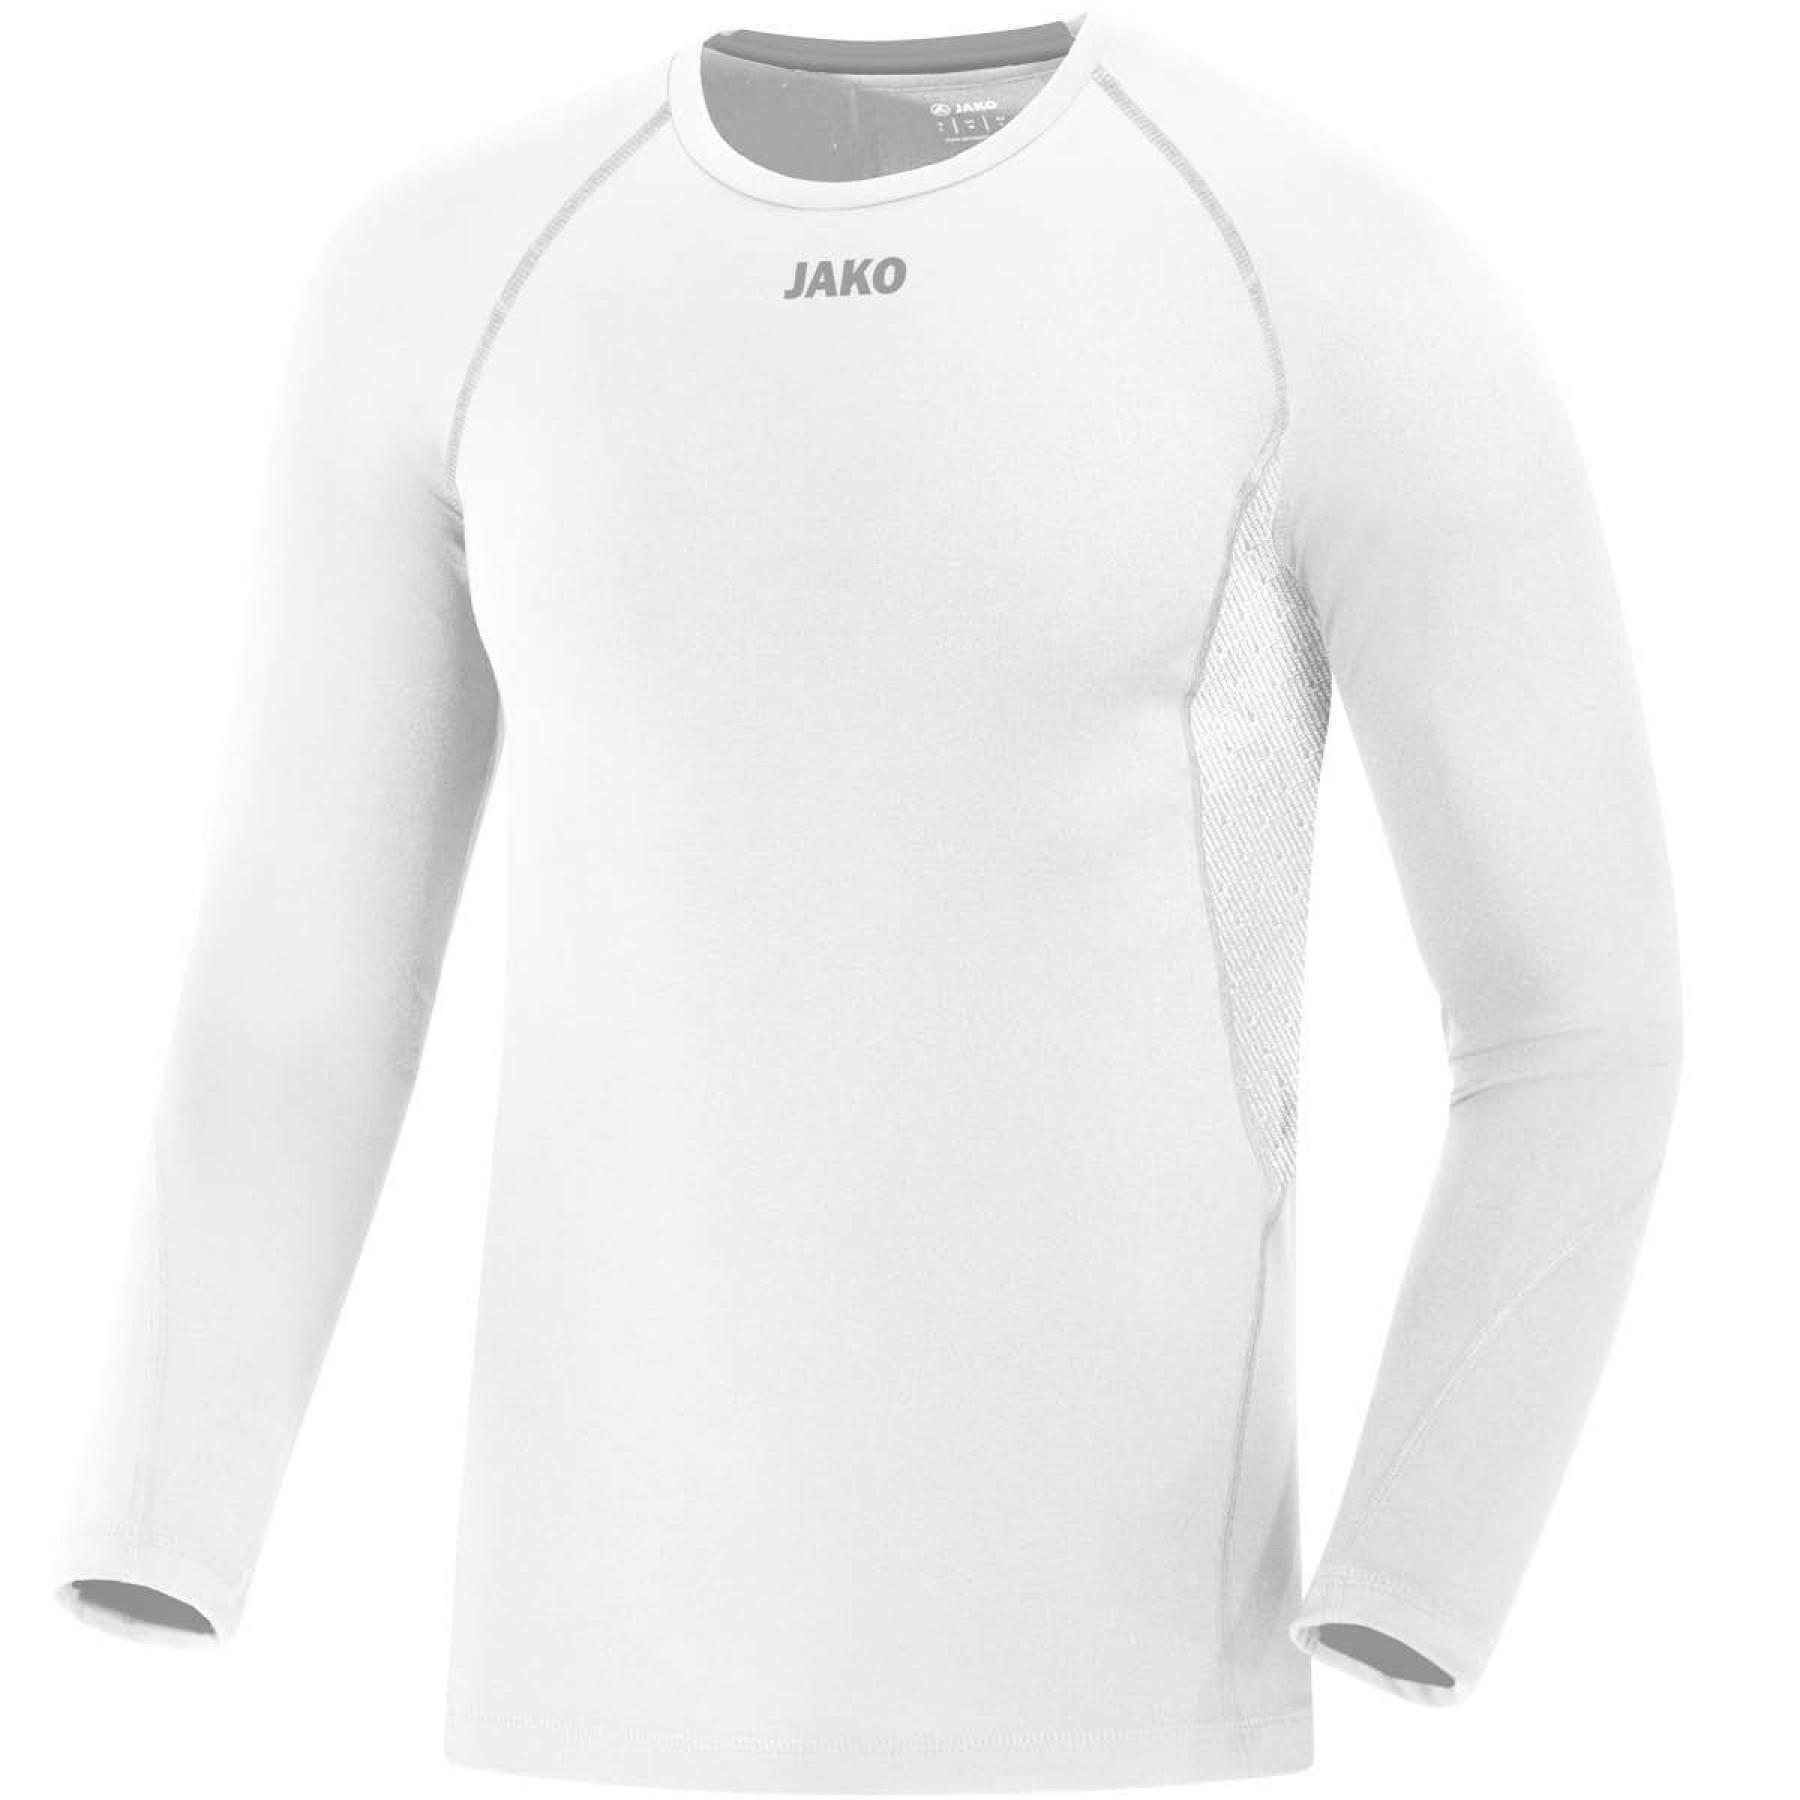 Jersey Jako Compression 2.0 manches longues